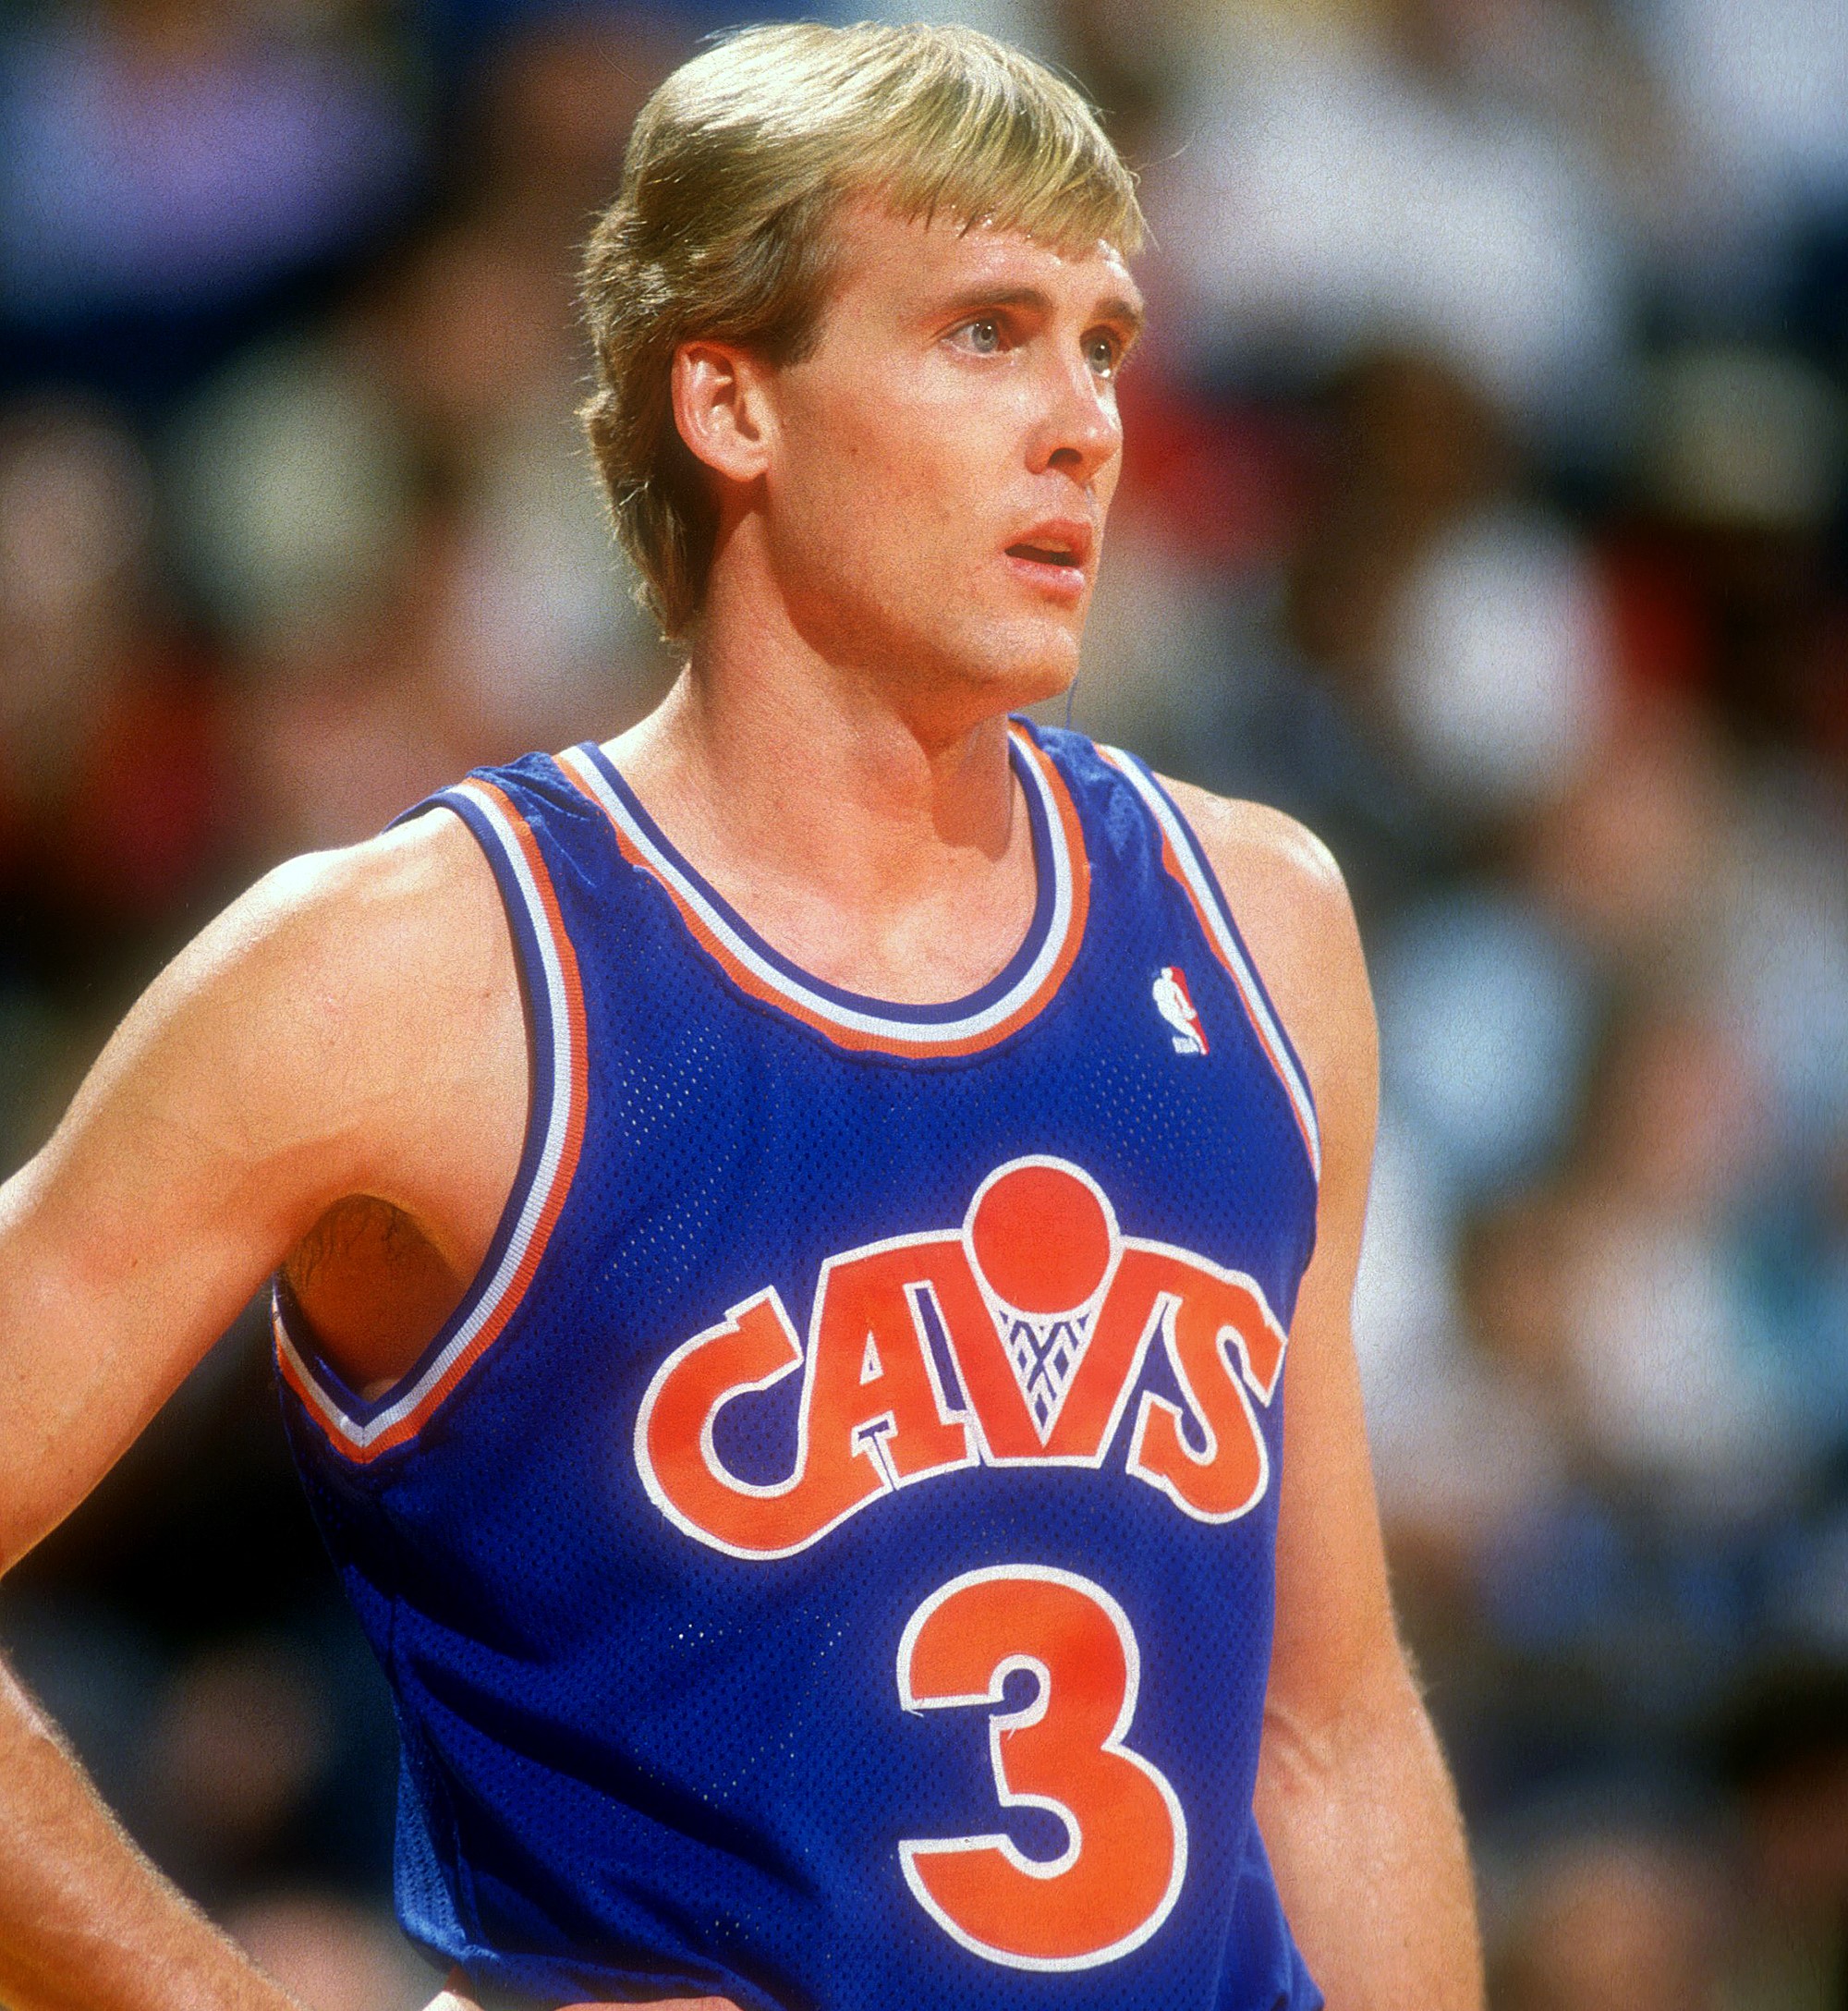 Craig Ehlo of the Cleveland Cavaliers during an NBA game against the Washington Bullets.